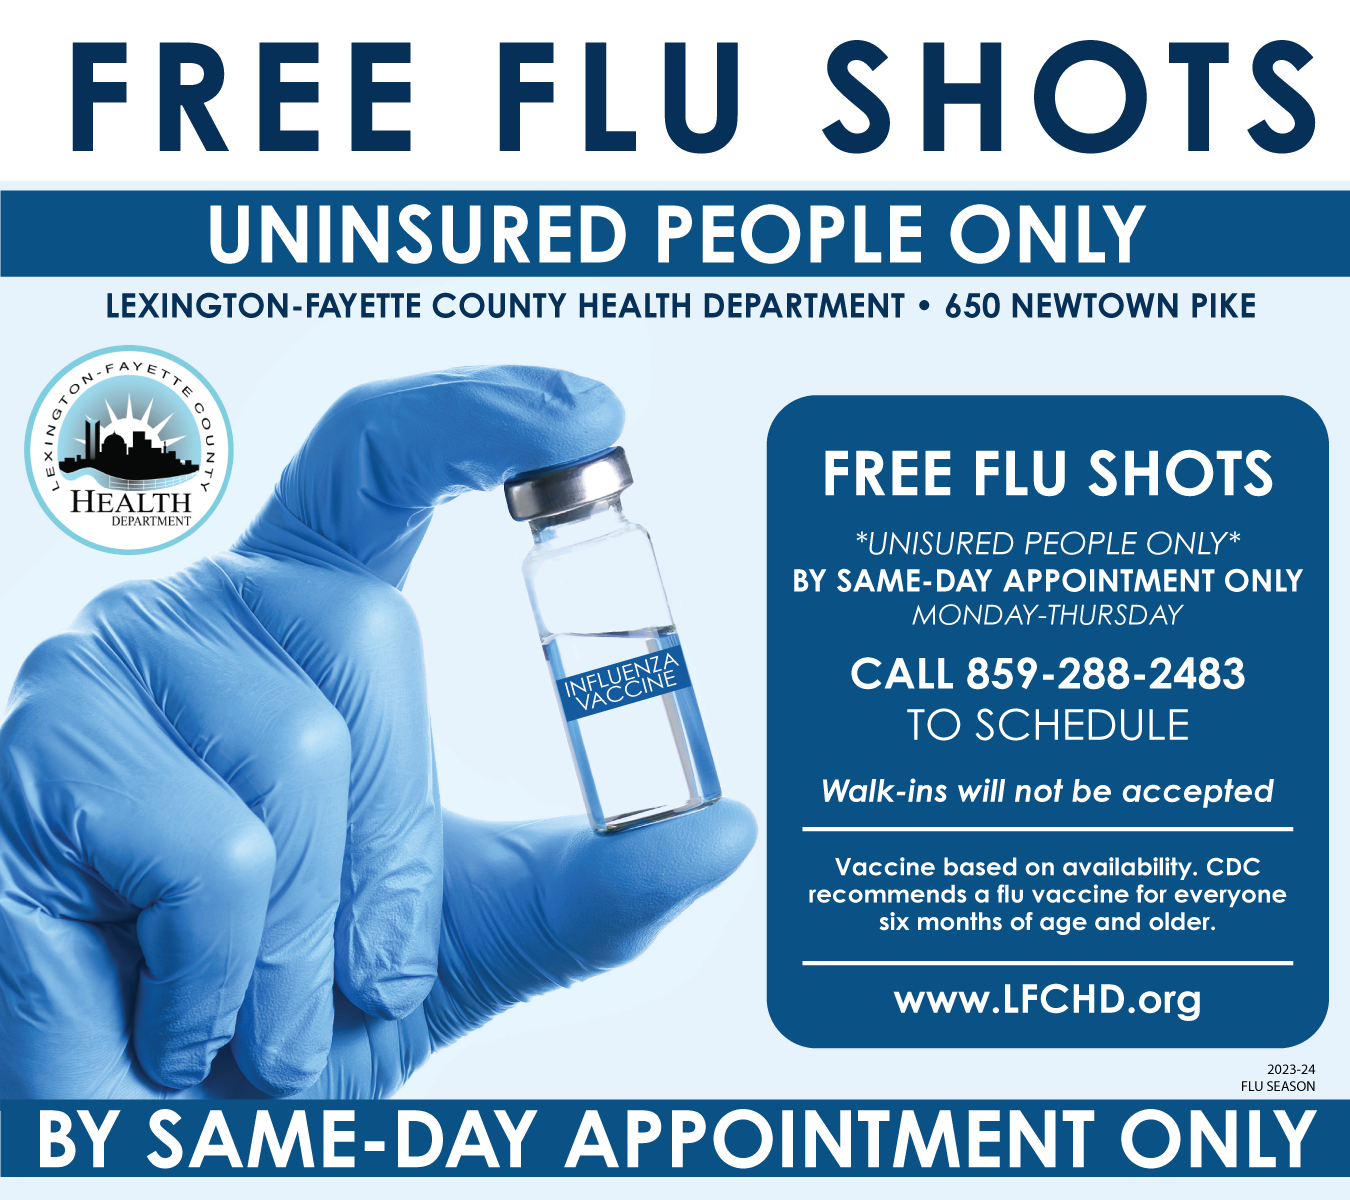 Flu & COVID-19 shots now available in Public Health Clinic